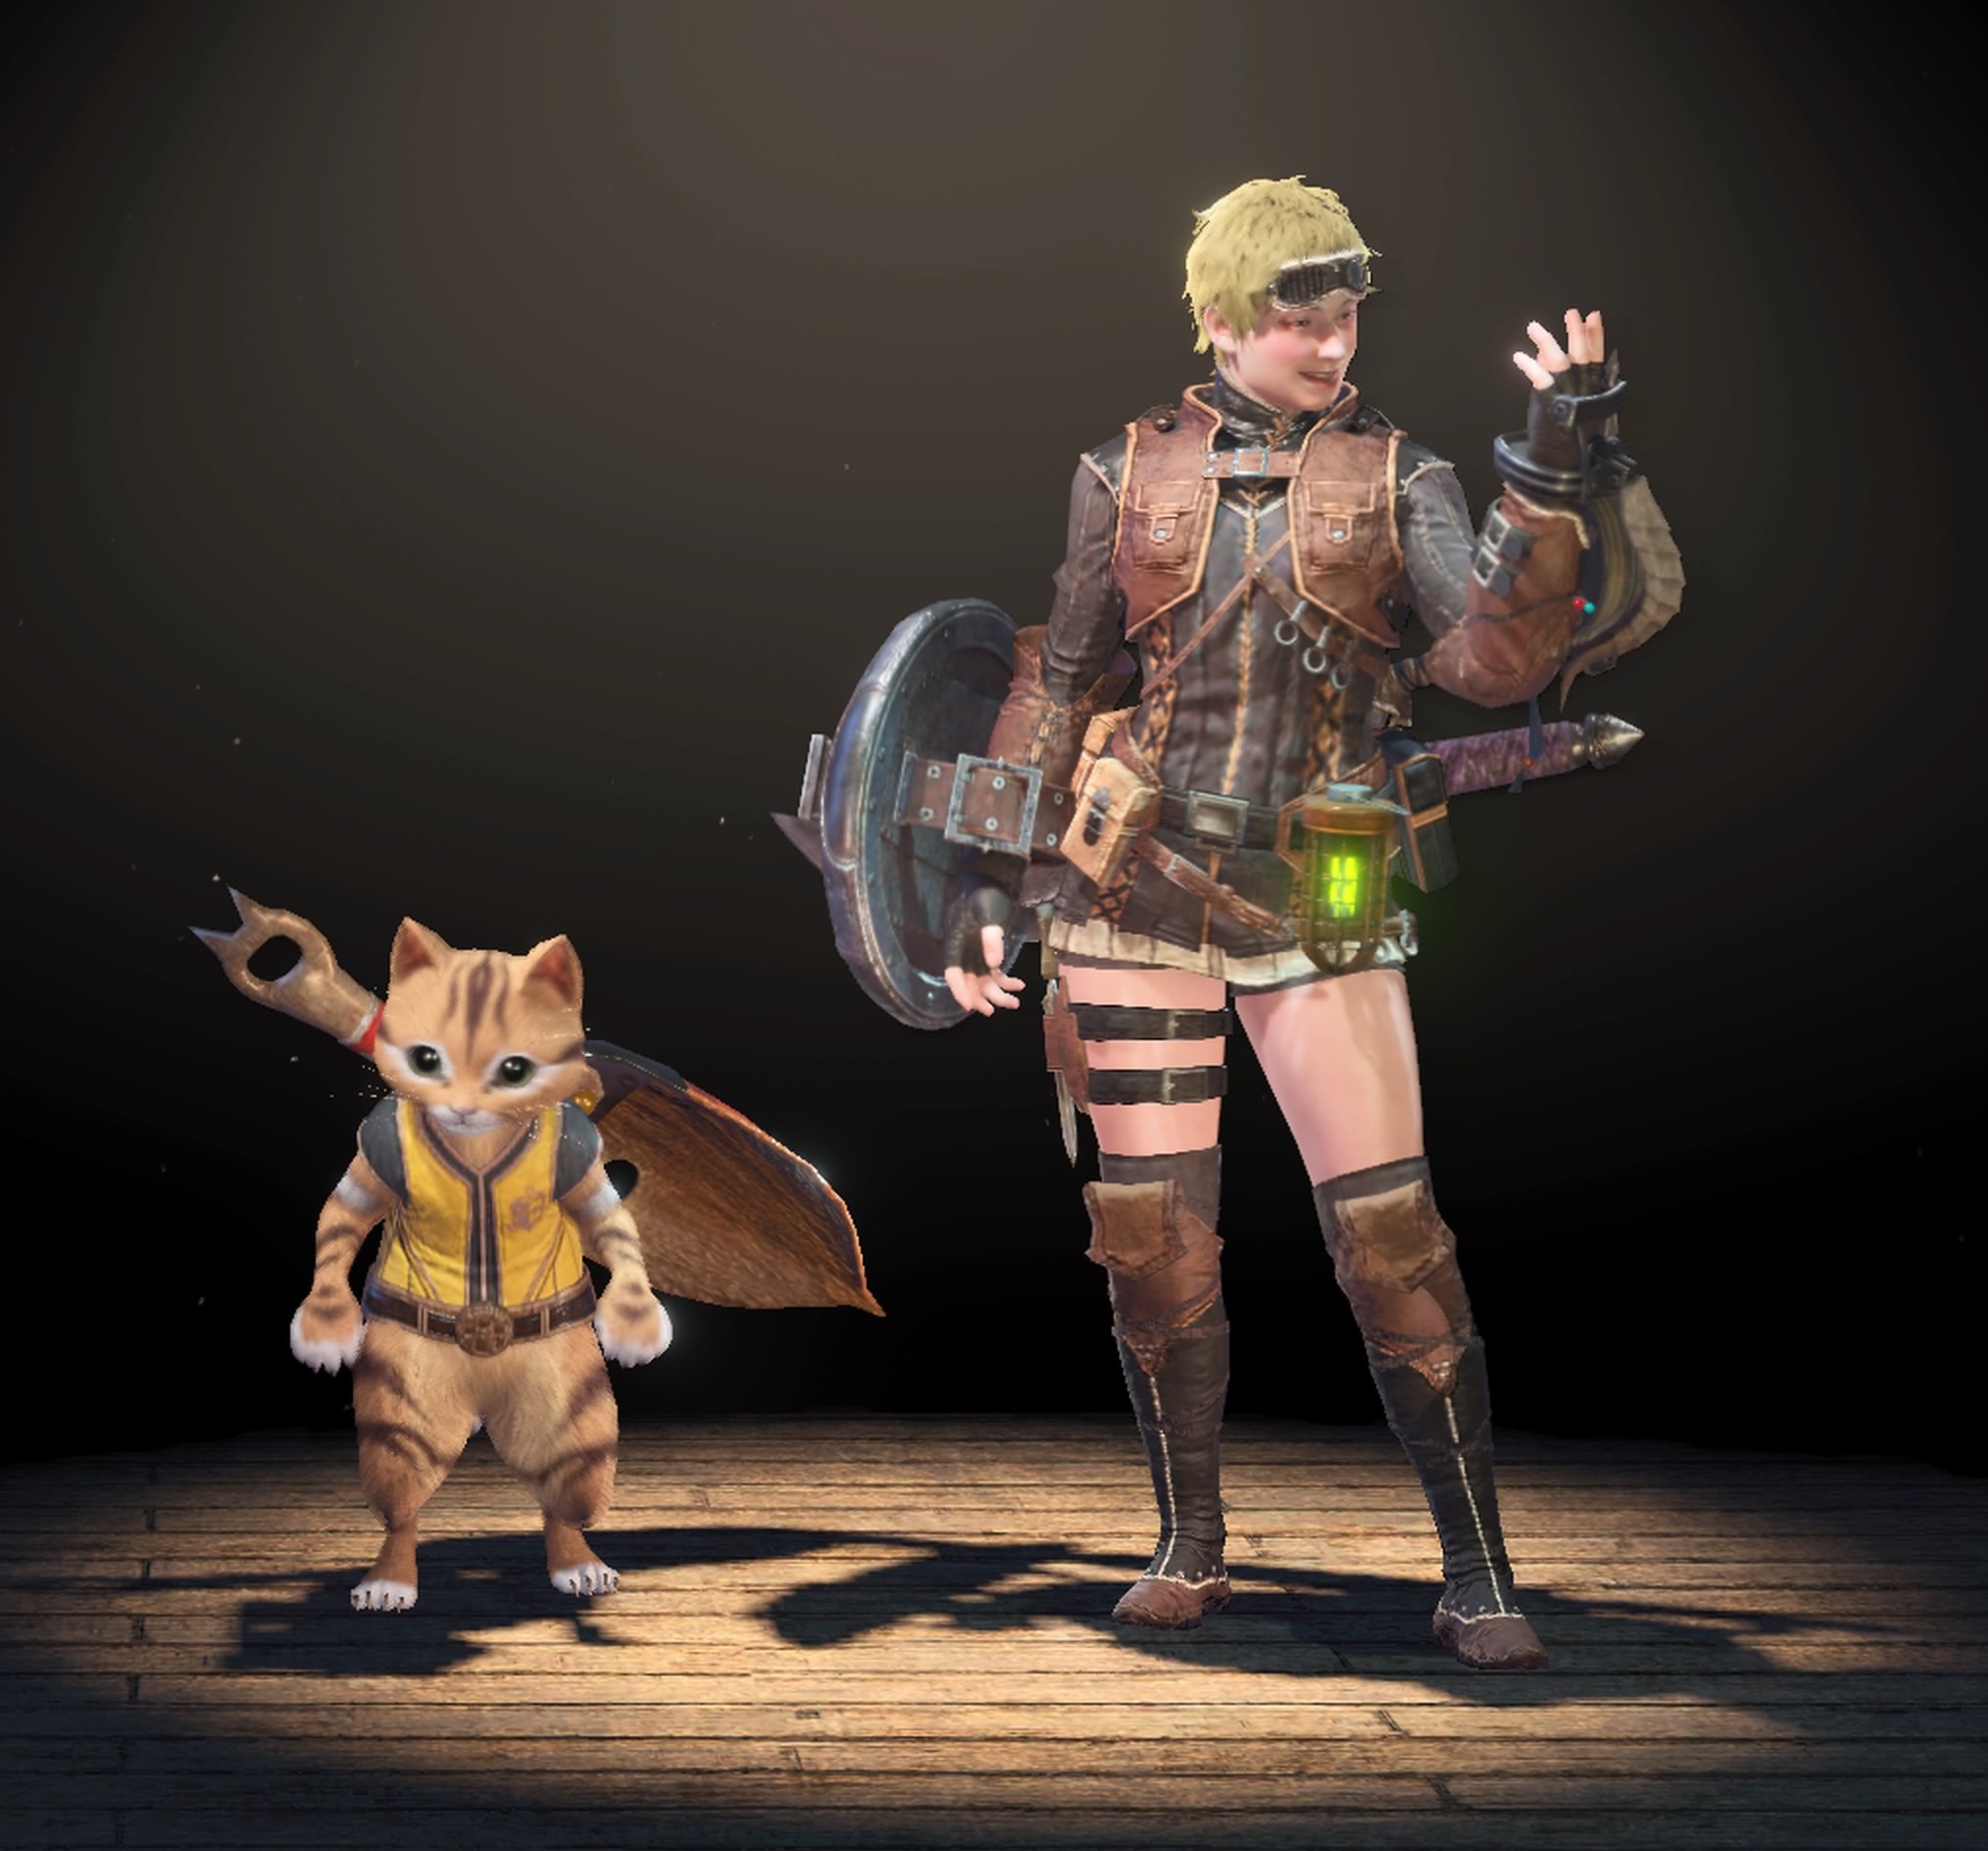 Five Of My Favourite Things About Monster Hunter World